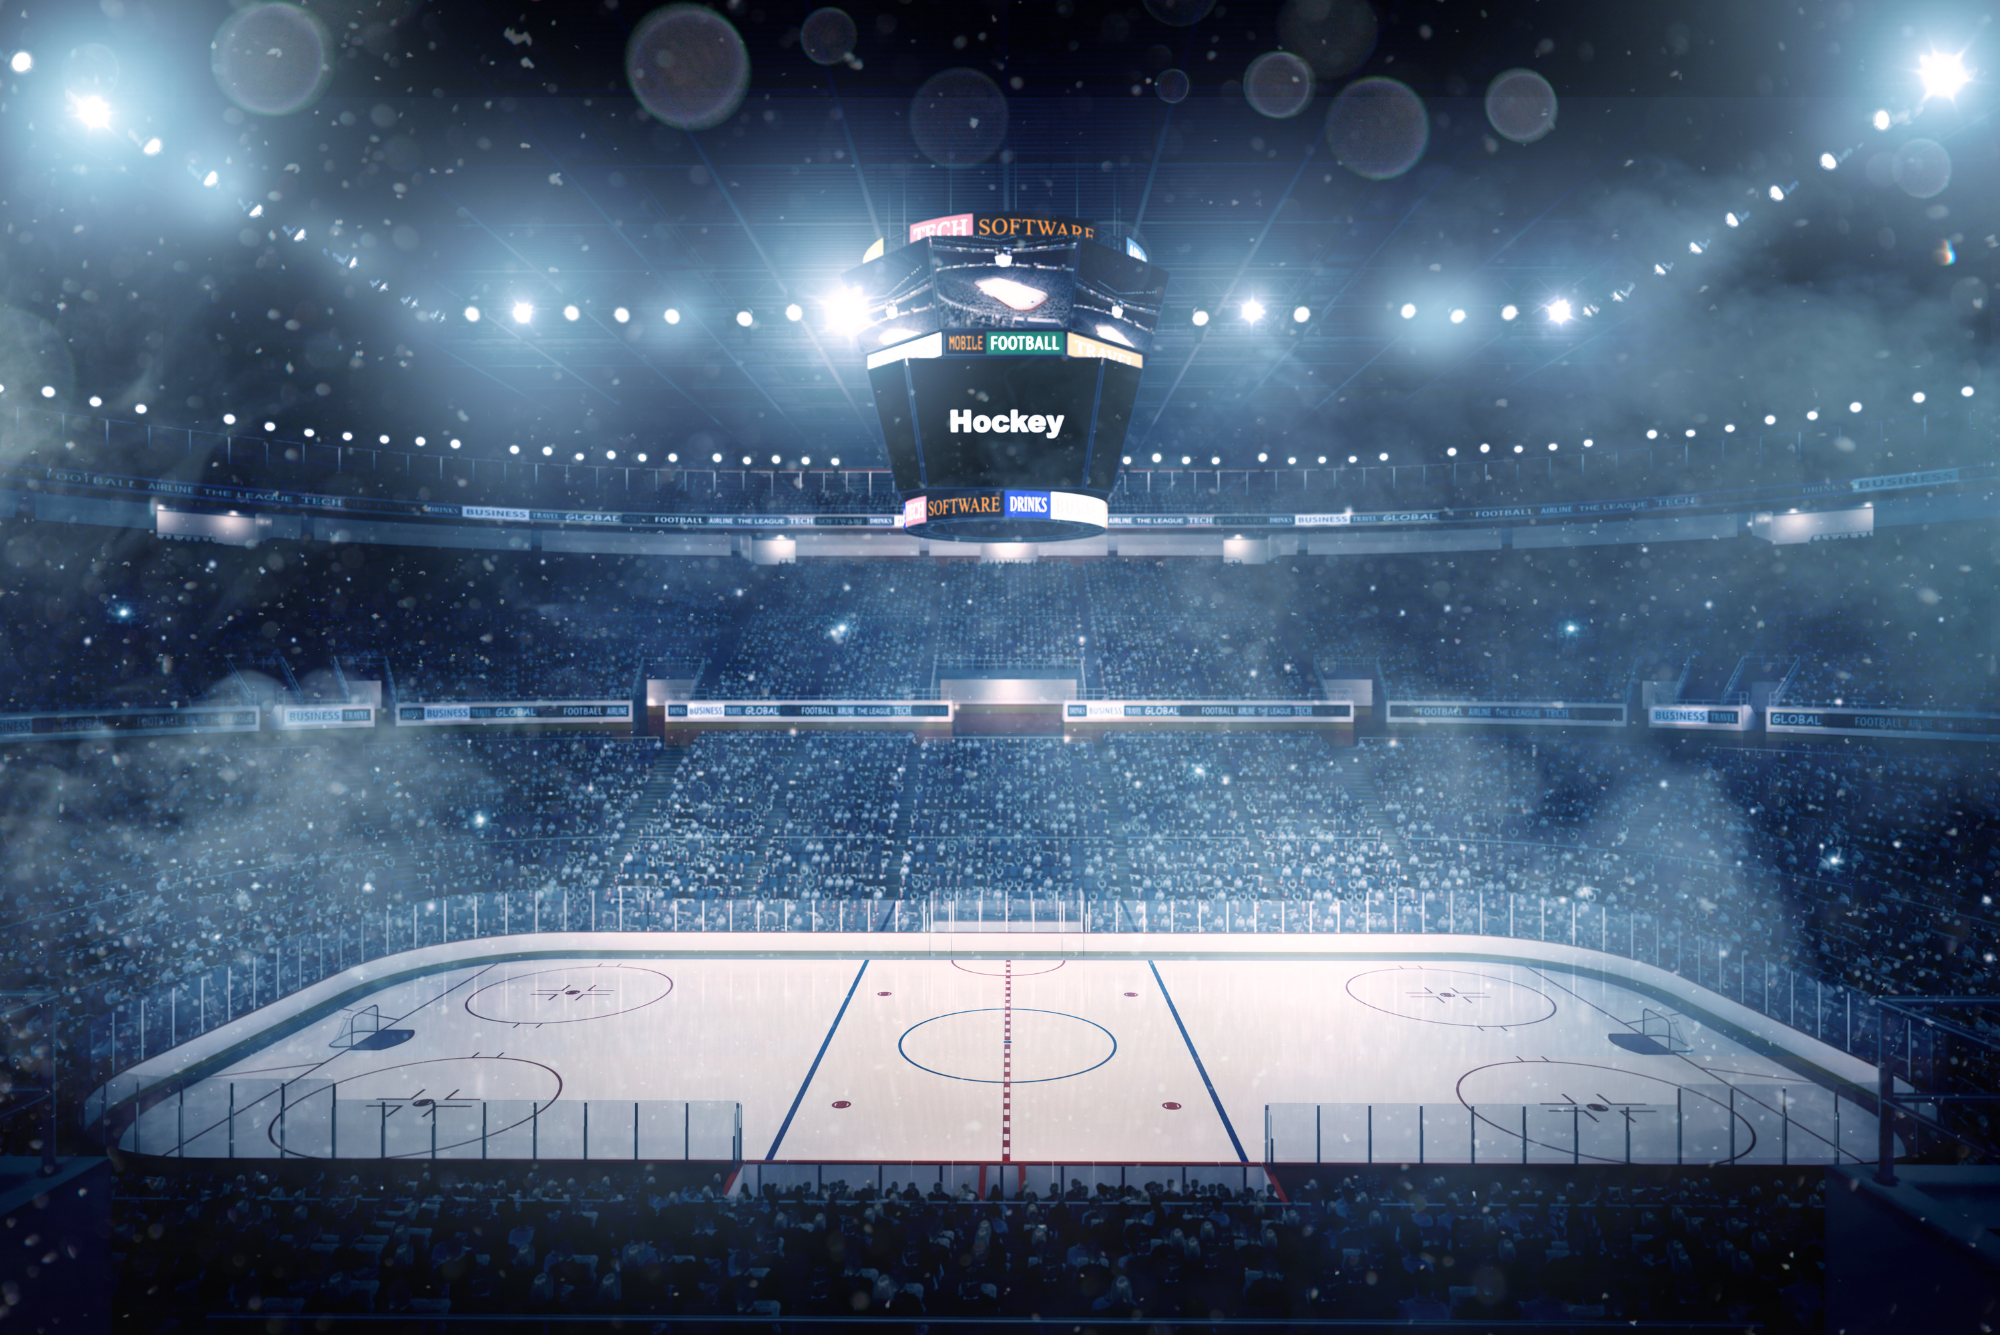 A wide shot of a hockey rink from the box seats represents a discussion on corporate season ticket rights and reselling.